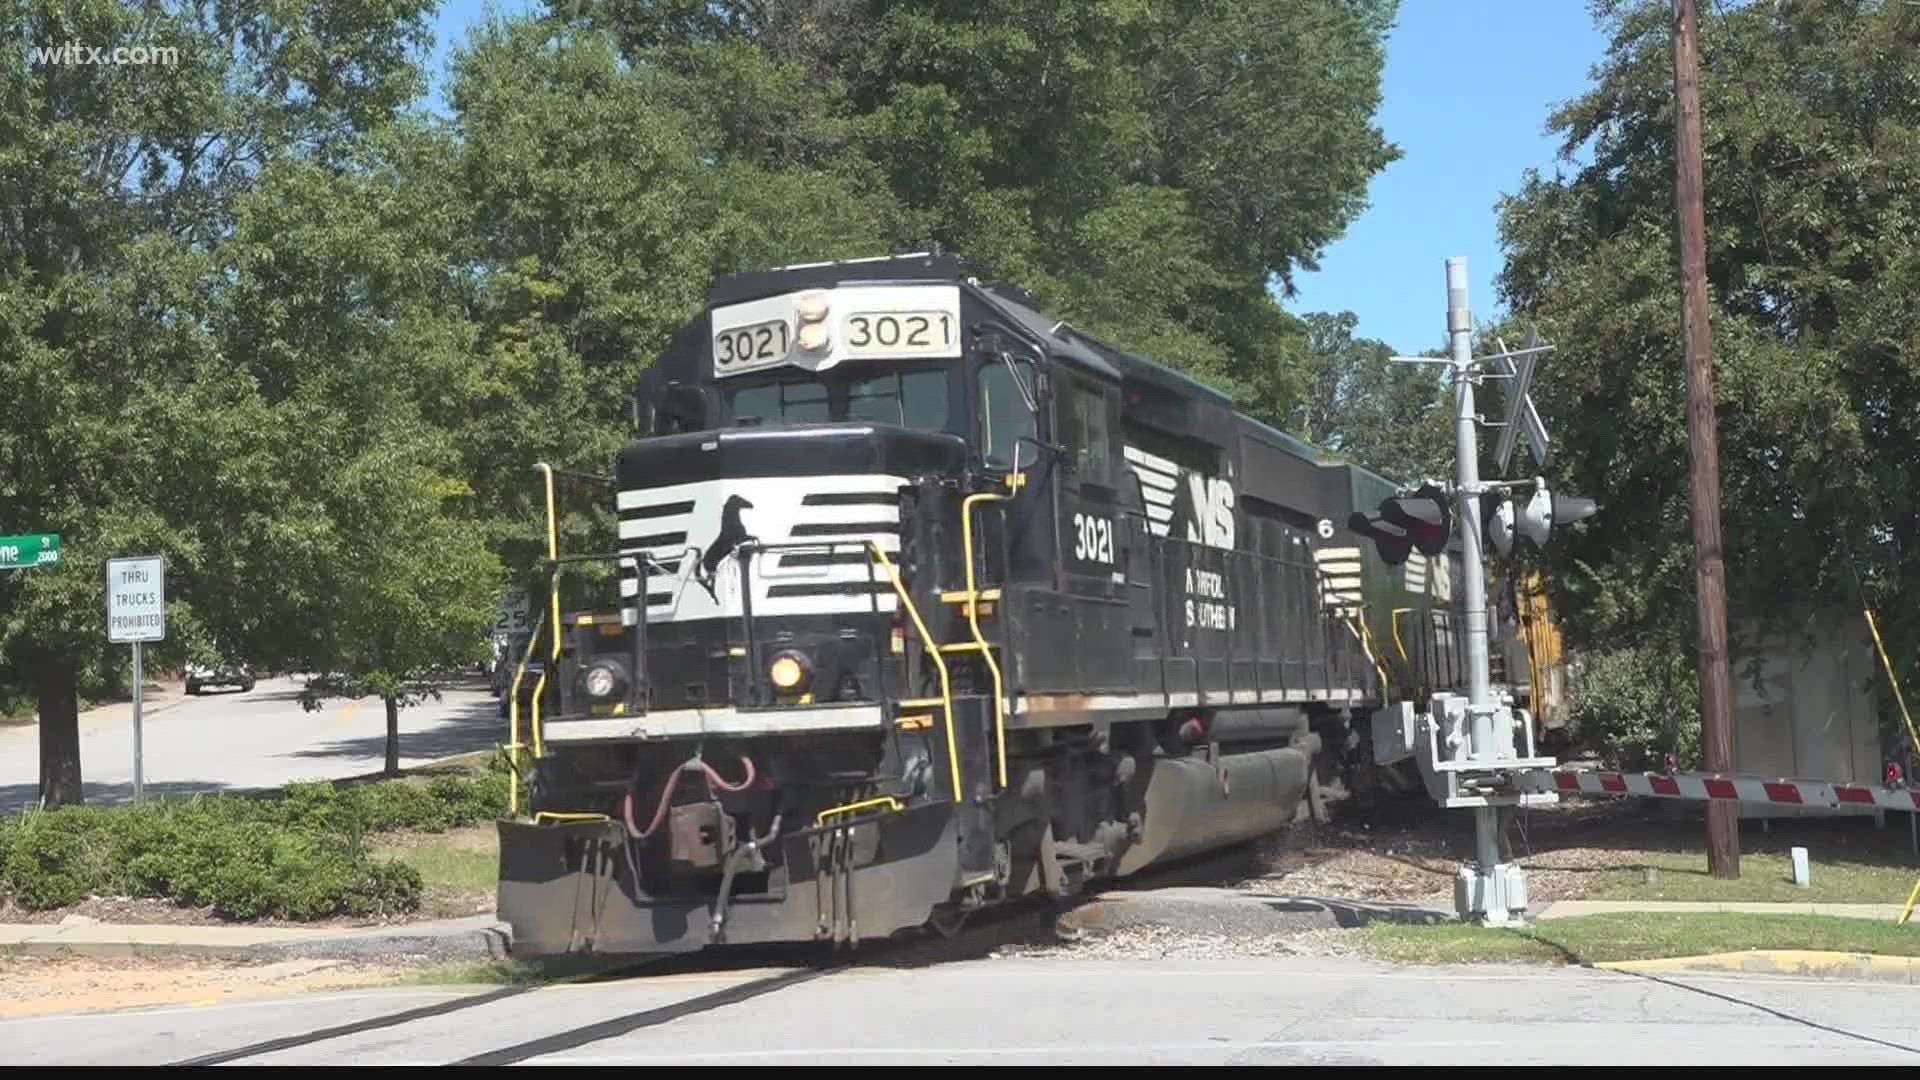 The plan is to create 'Quiet Zones' at certain railroad crossings so horns are only used in an emergency.